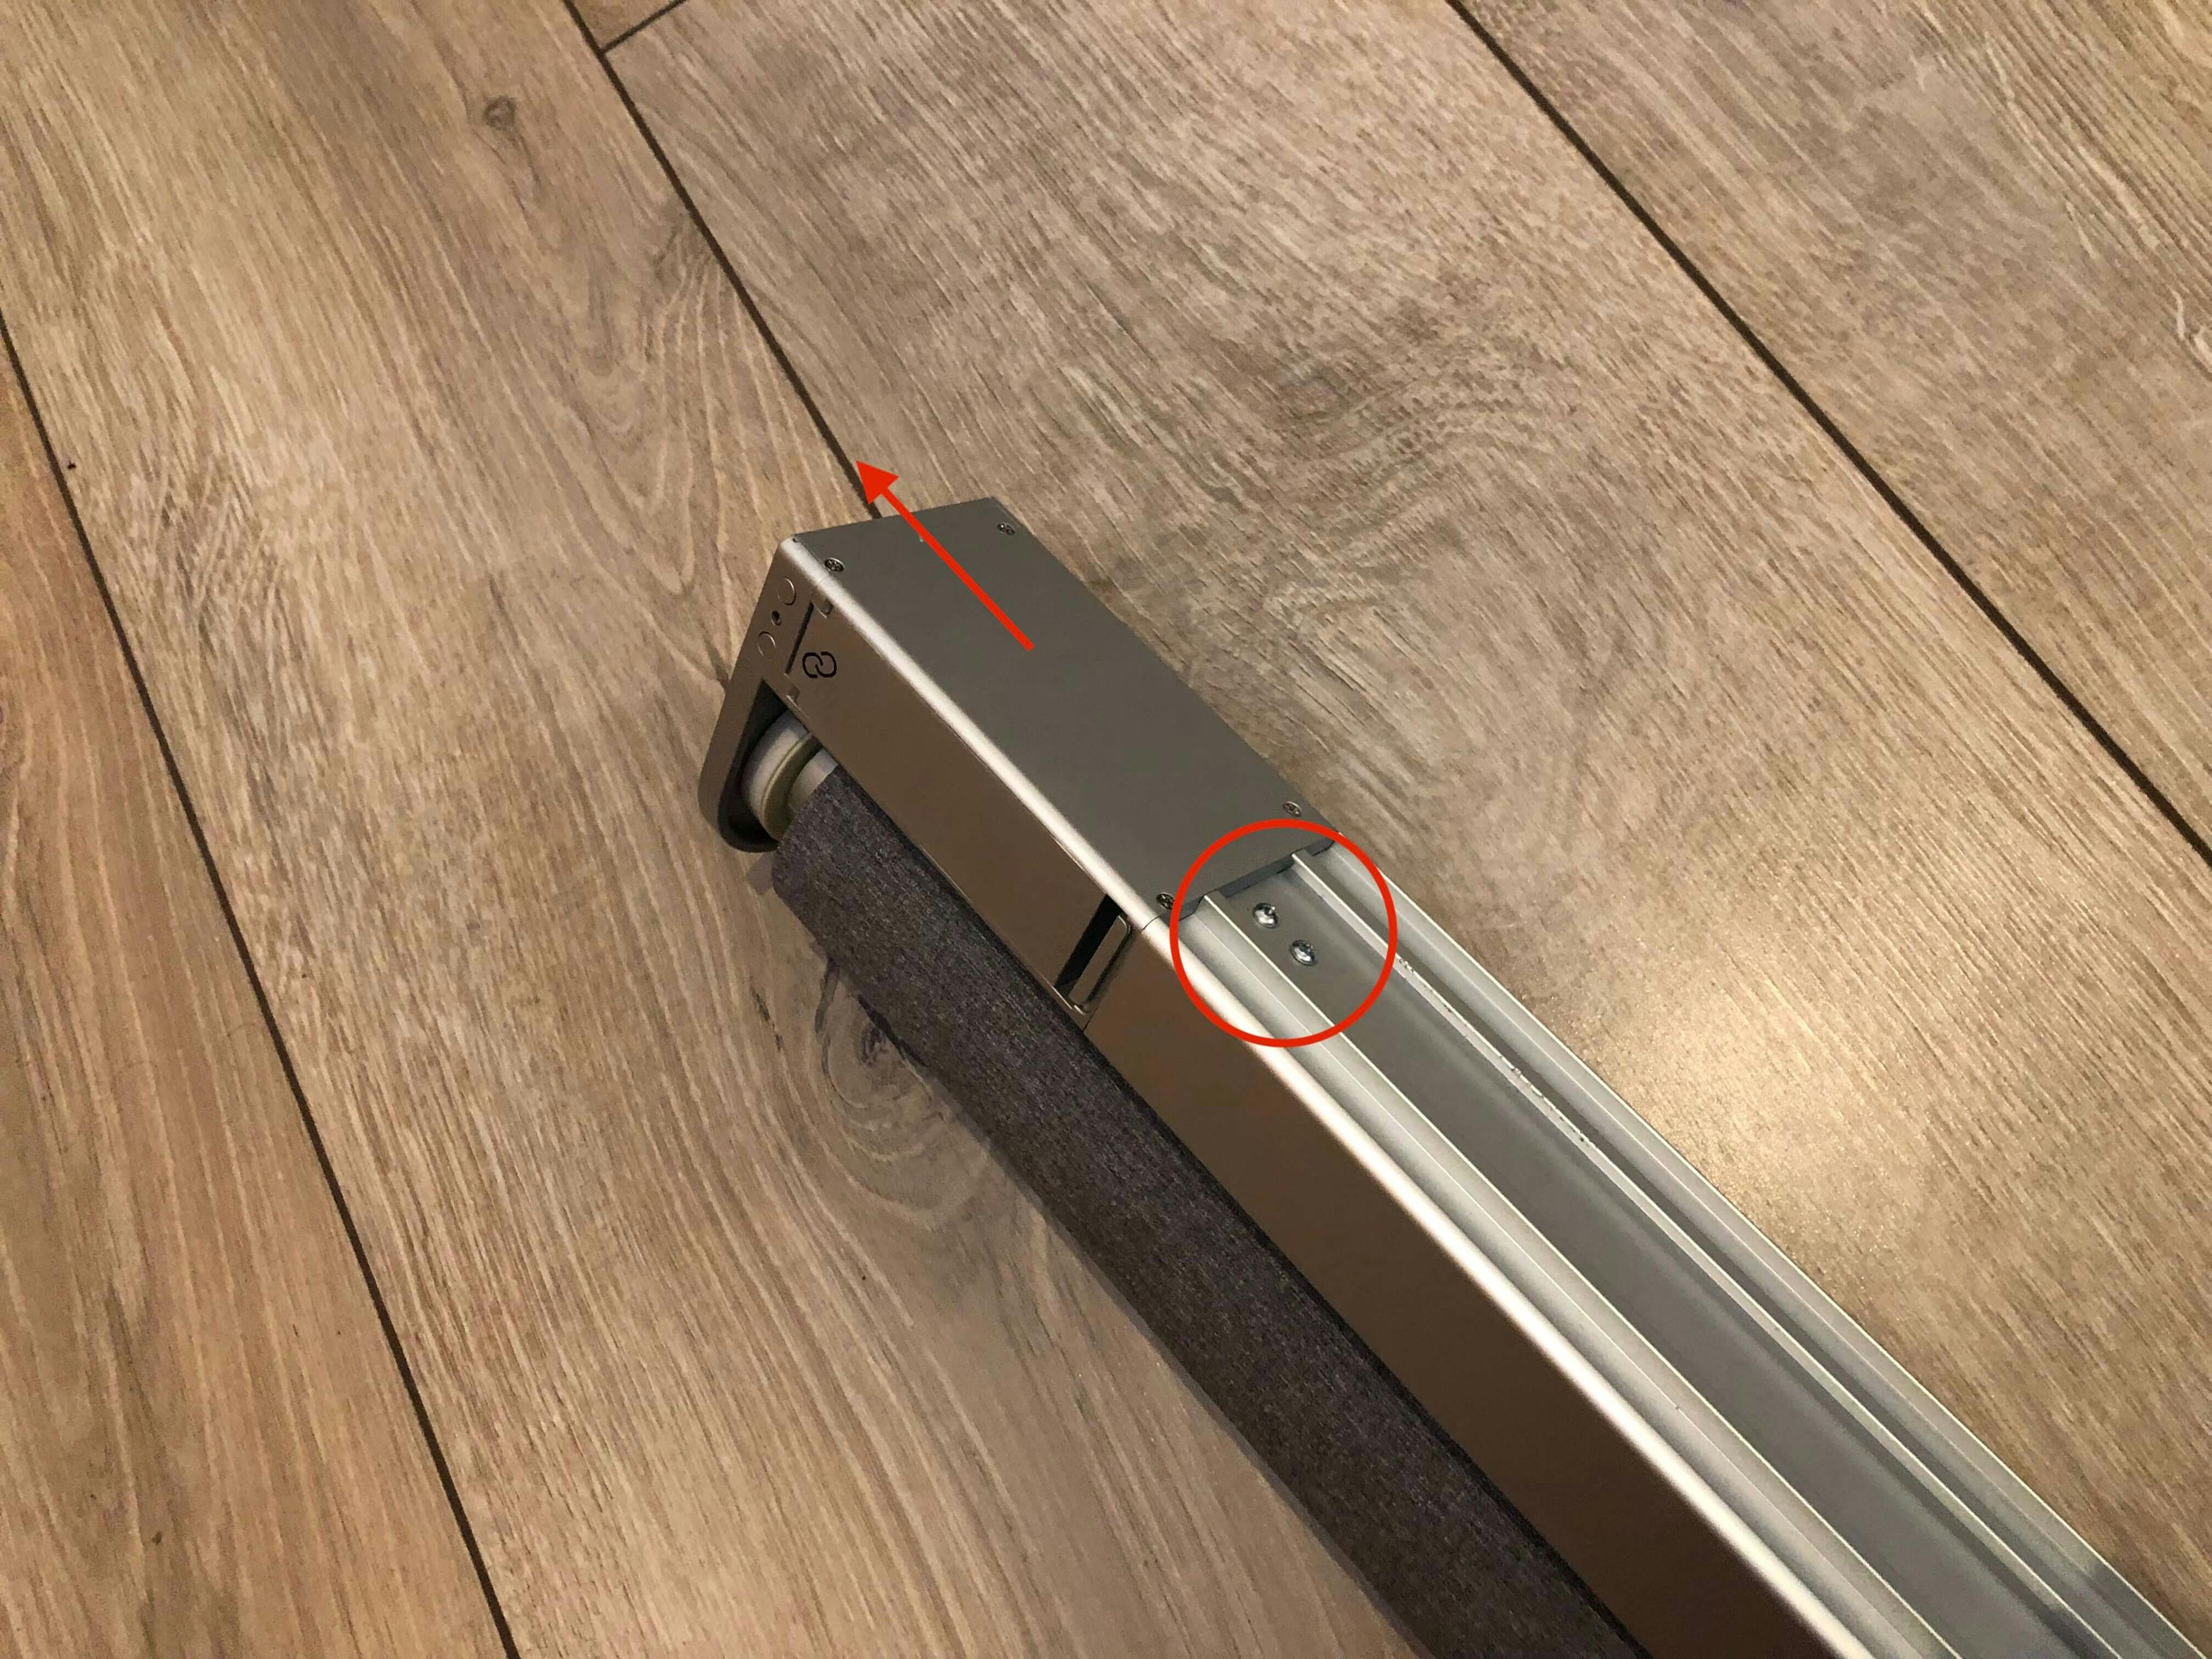 Remove the two screws circled in red, then slide the plastic housing out of the aluminium rail